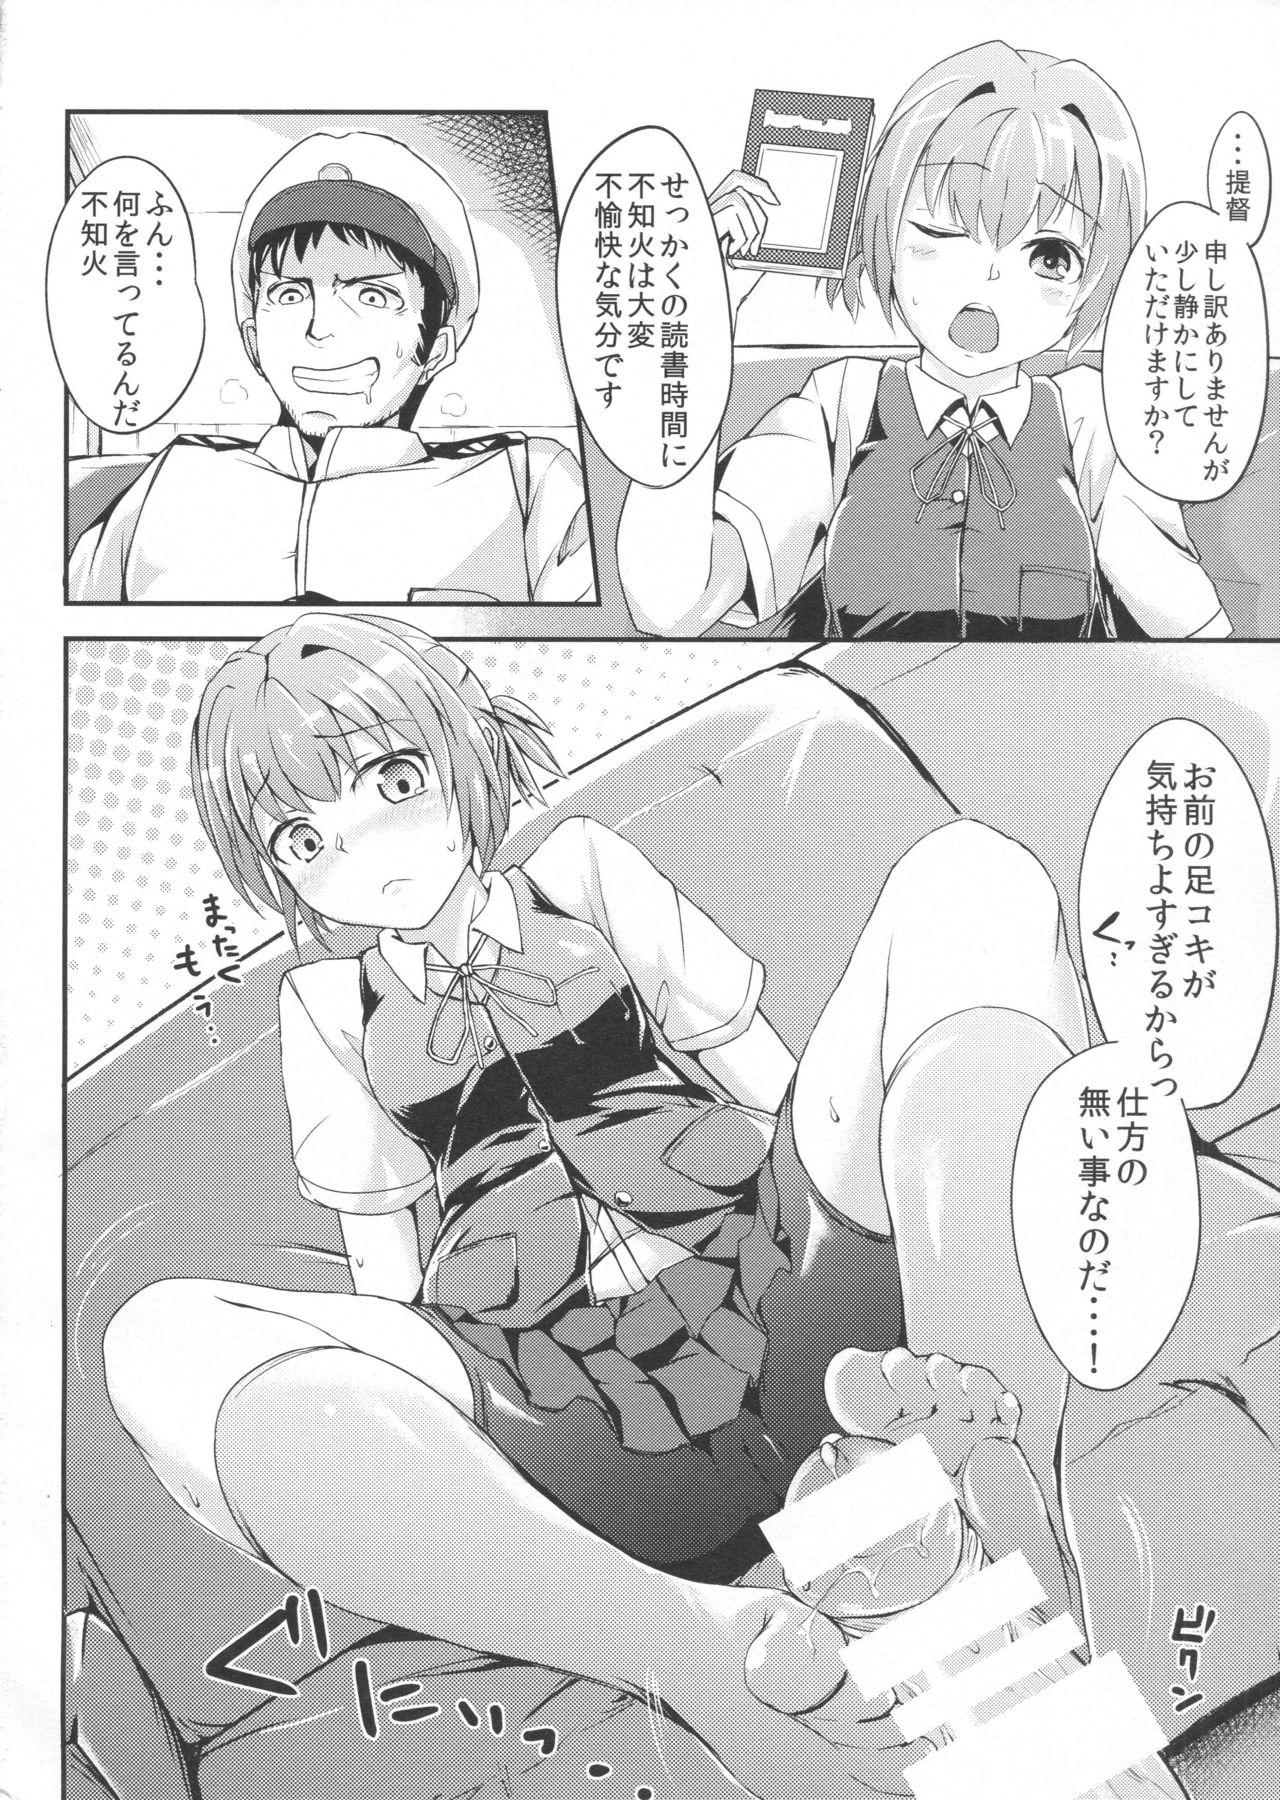 Dicks Tsun to Dere Nui - Kantai collection Cheating Wife - Page 5